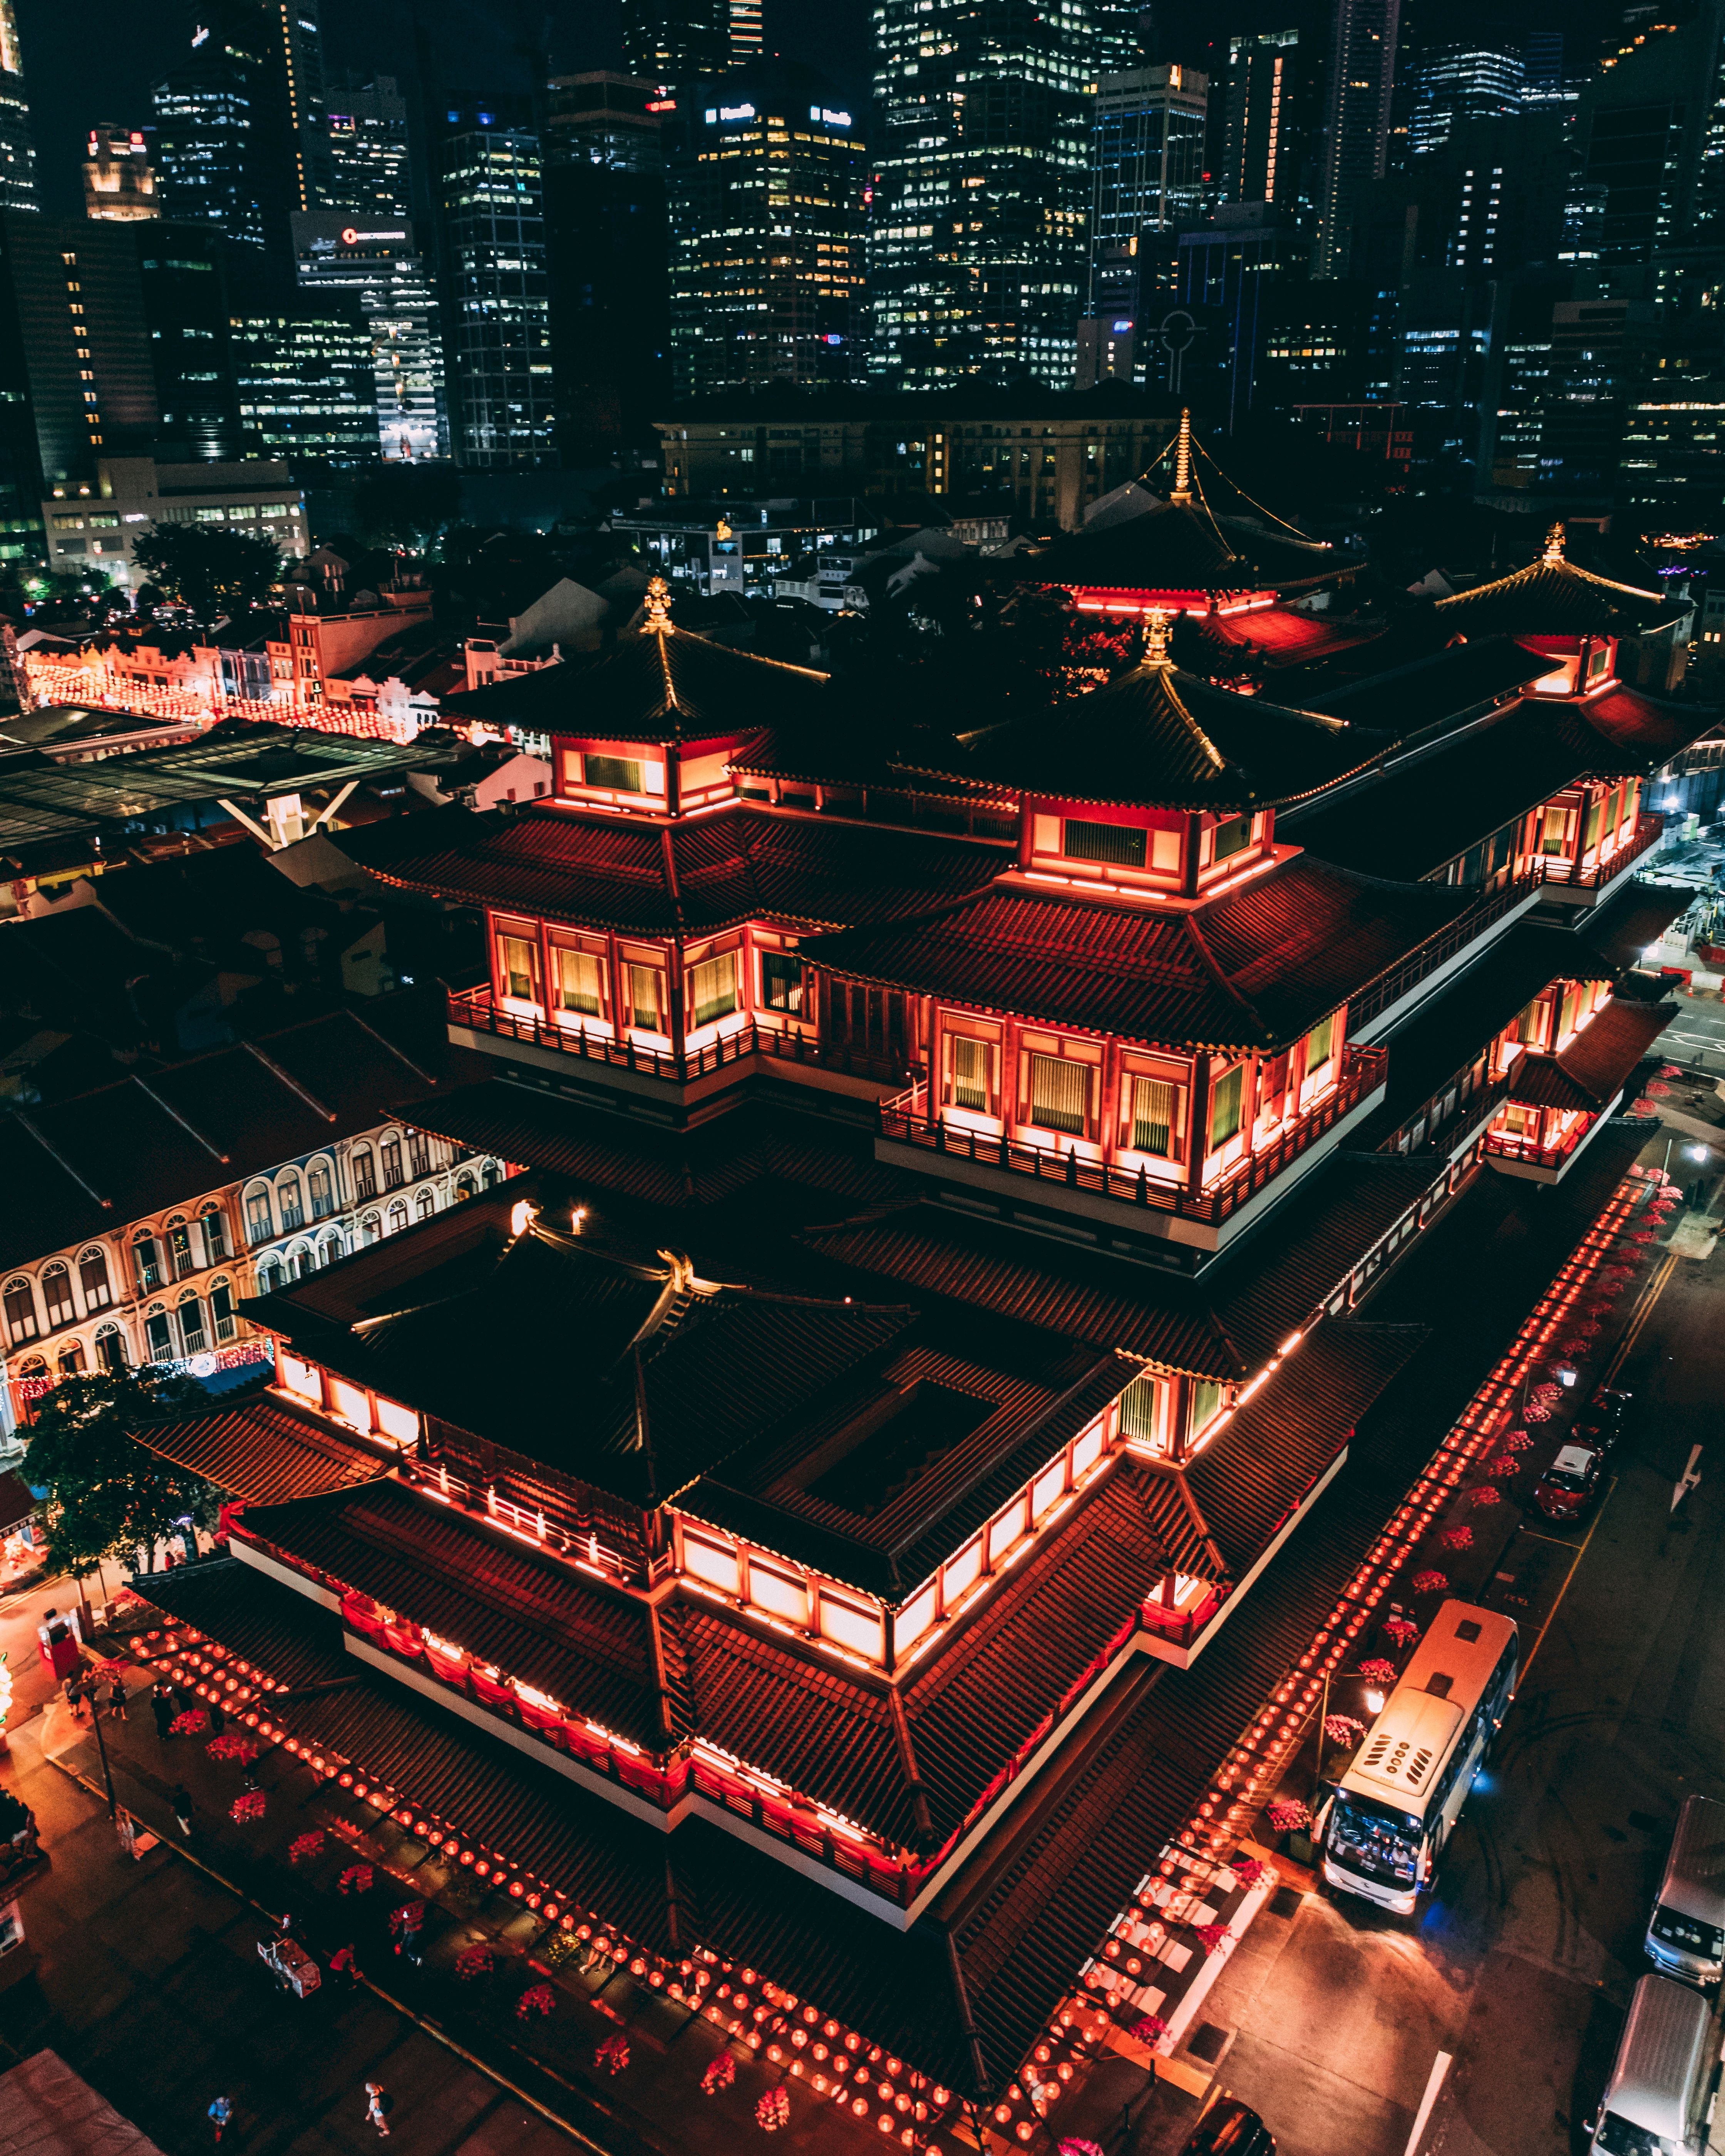 pagoda, cities, architecture, view from above, night city, roof, china, roofs